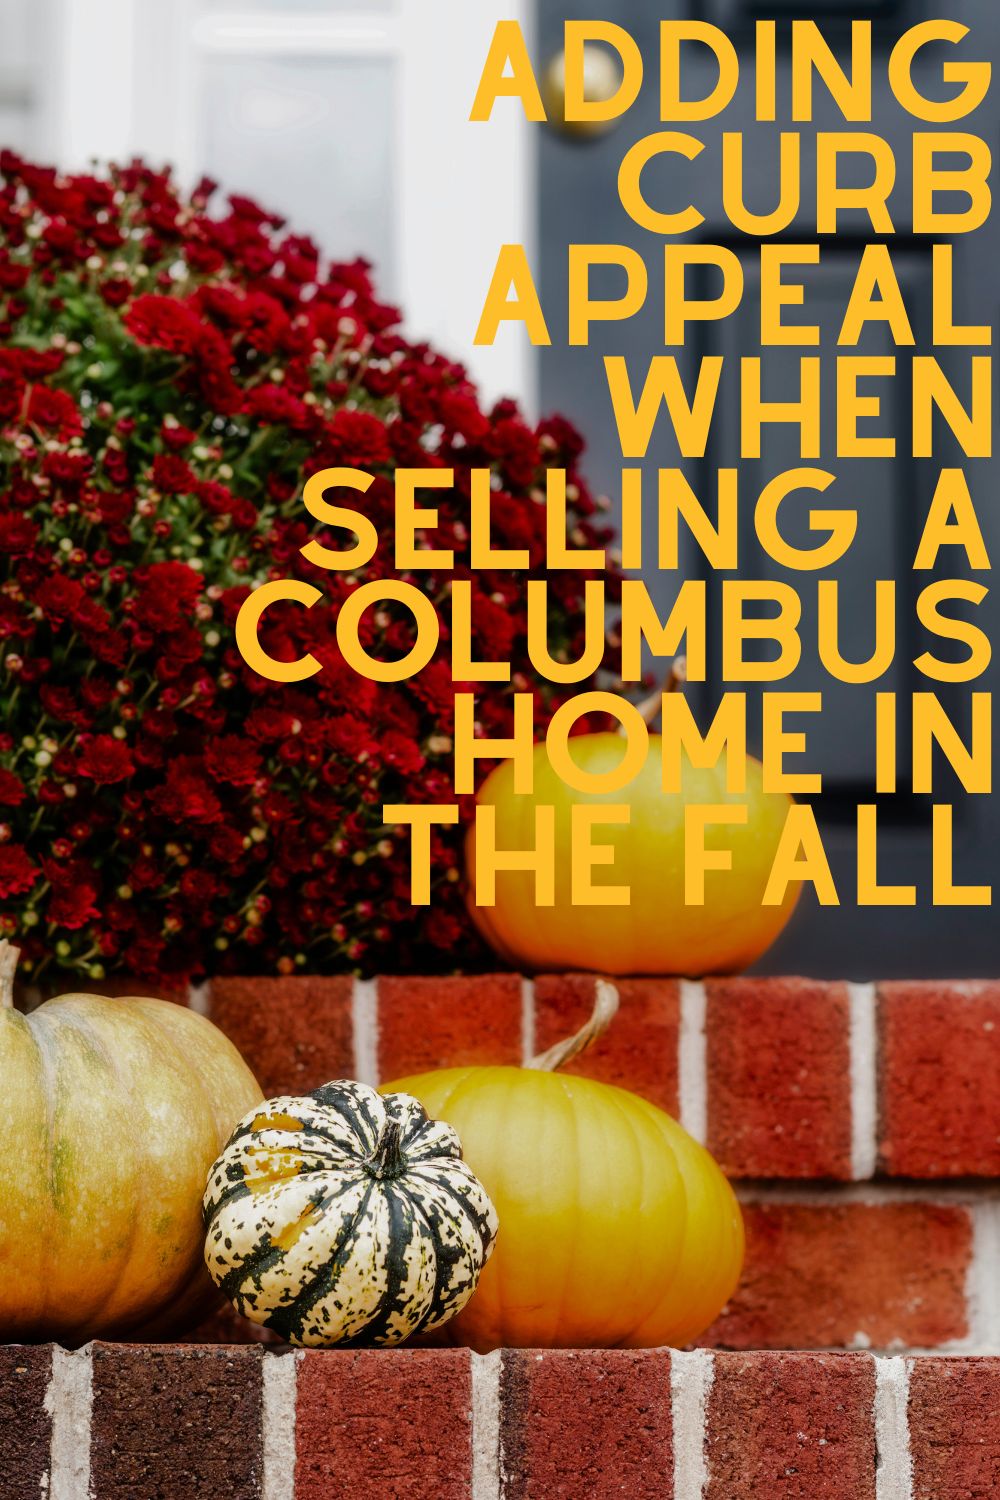 Adding Curb Appeal When Selling a Columbus Home in the Fall